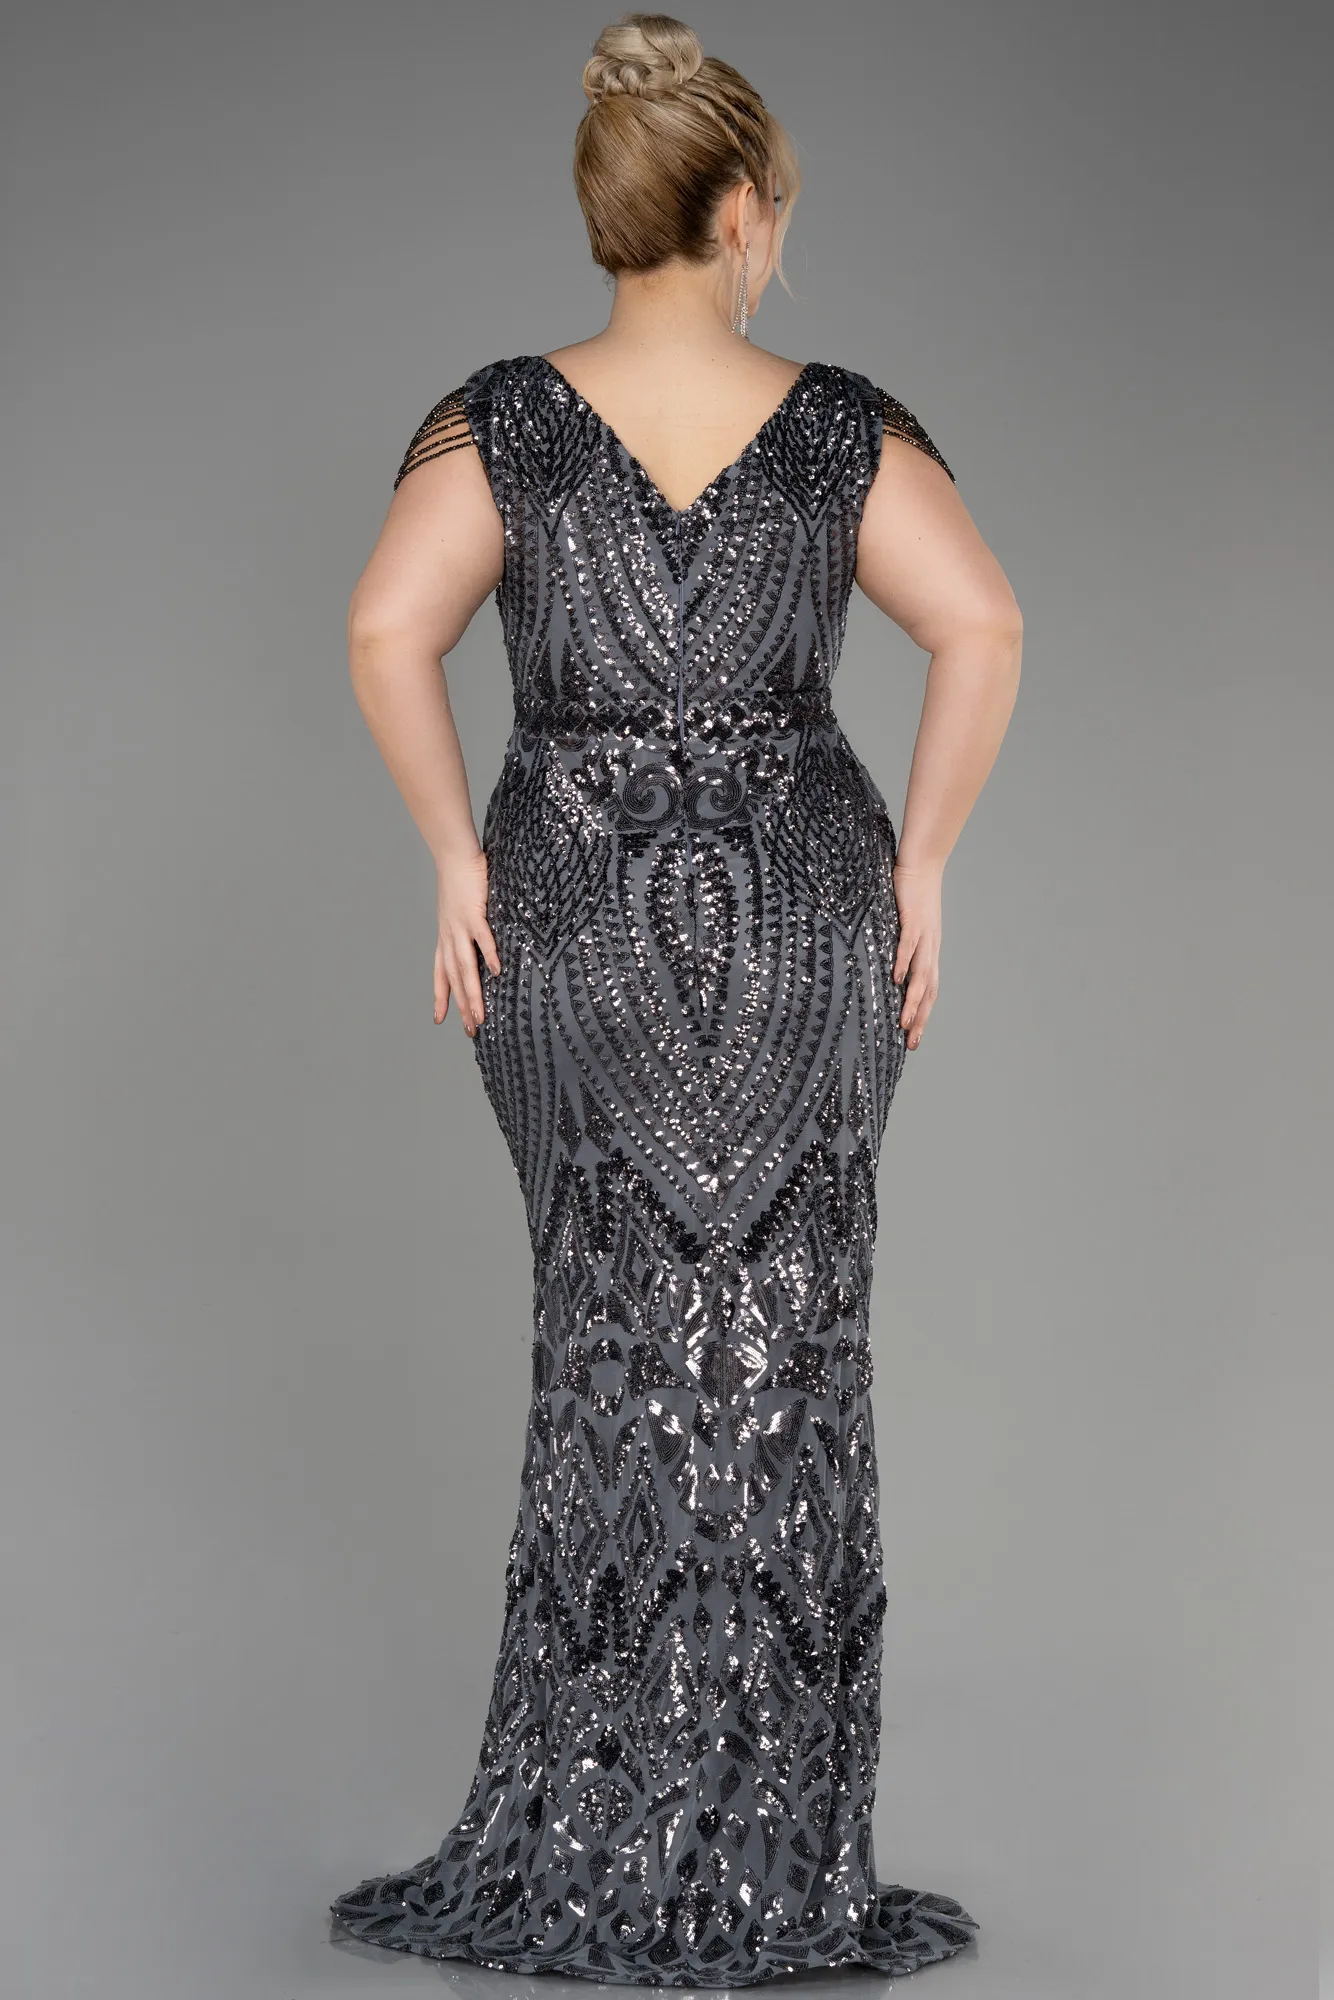 Anthracite-Long Scaly Plus Size Evening Dress ABU3845